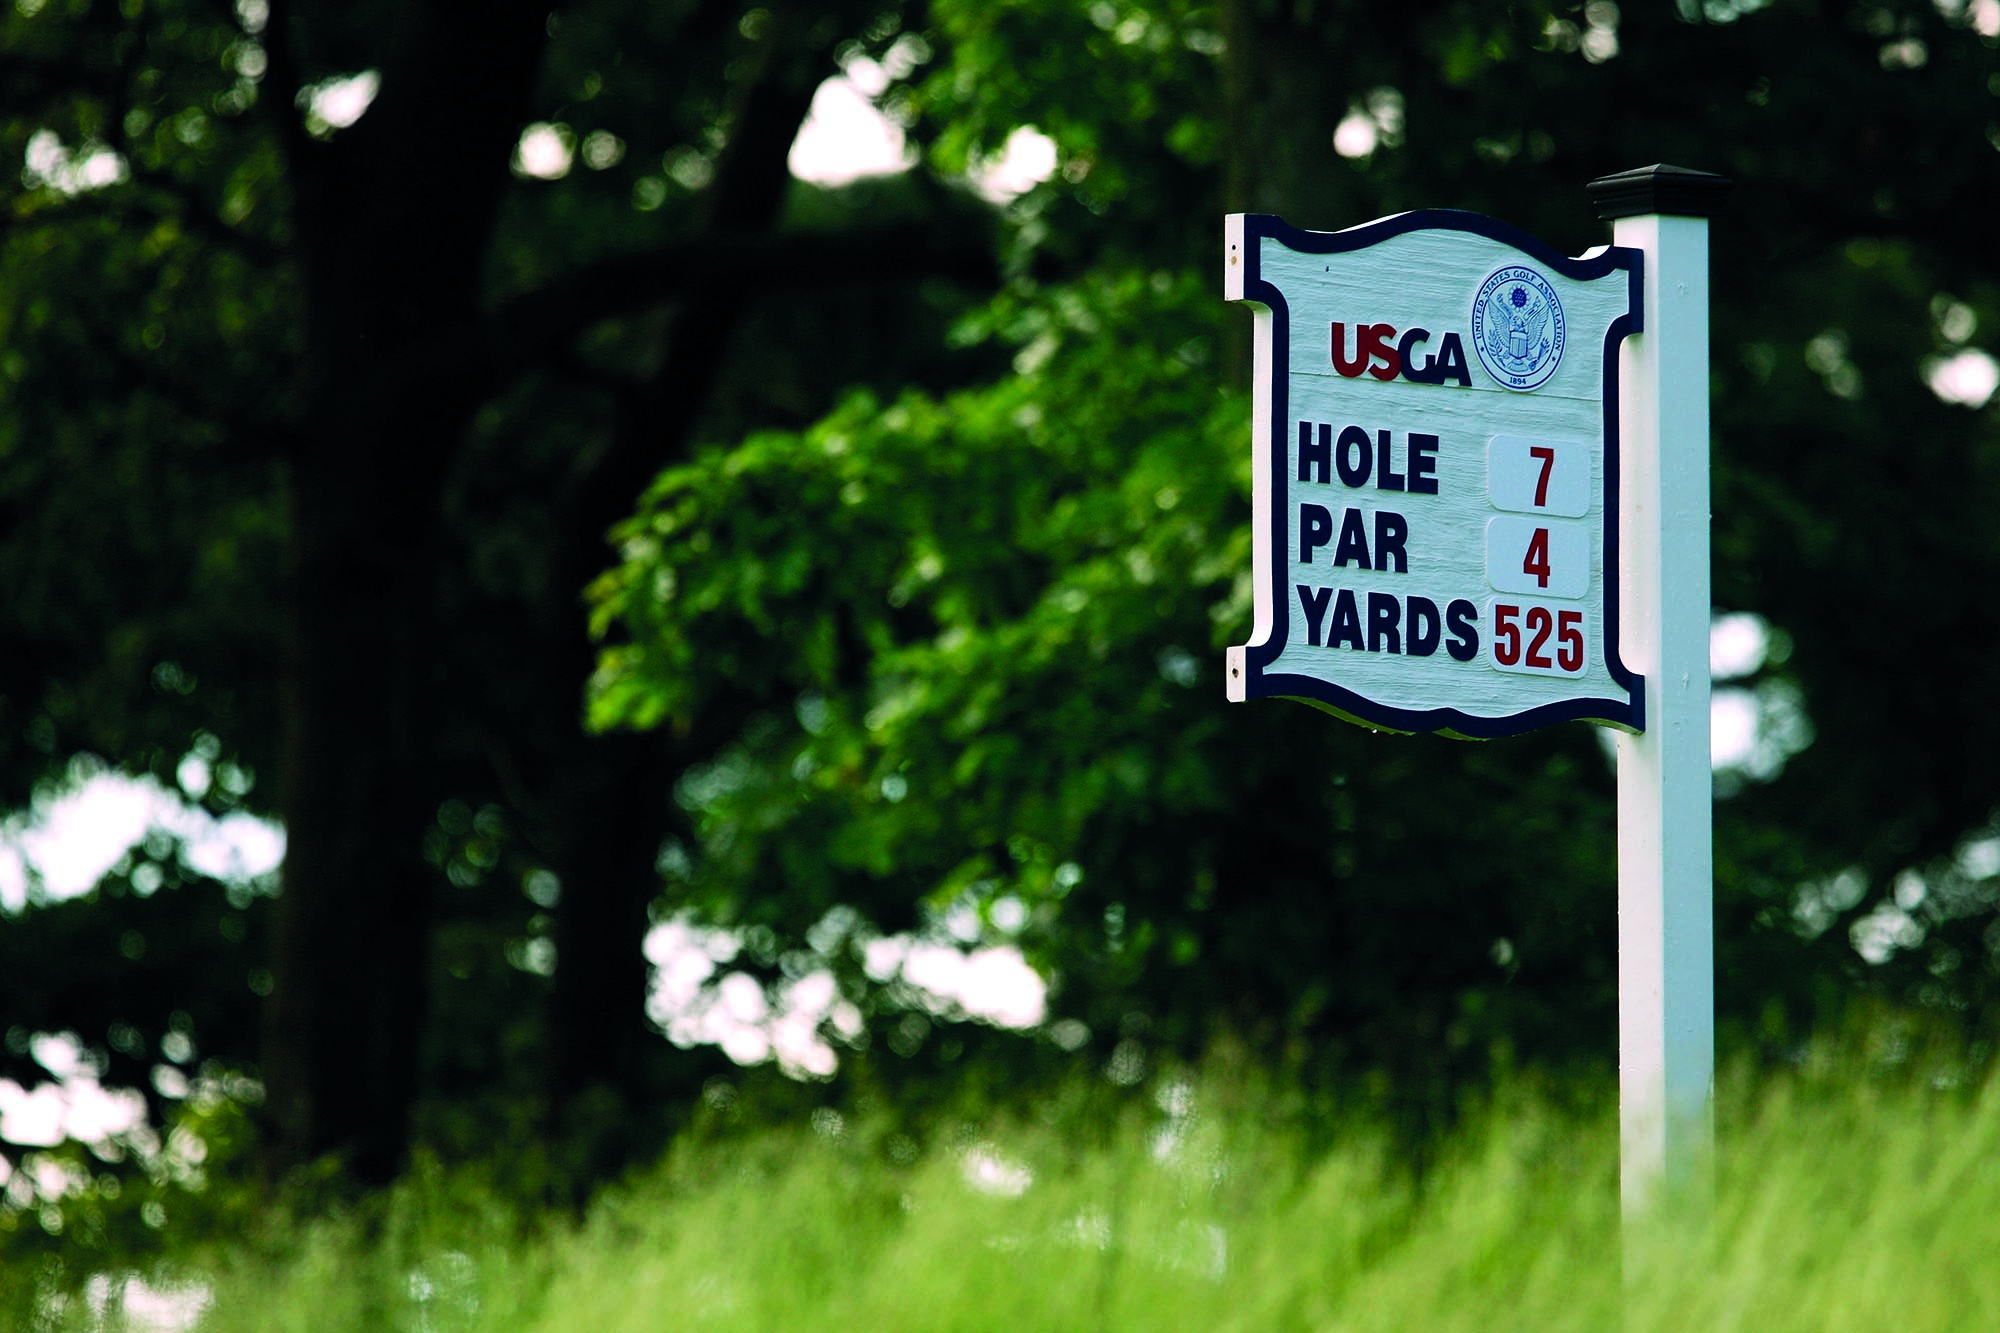 NCG Top 100s England: Easy is the new difficult for golf courses